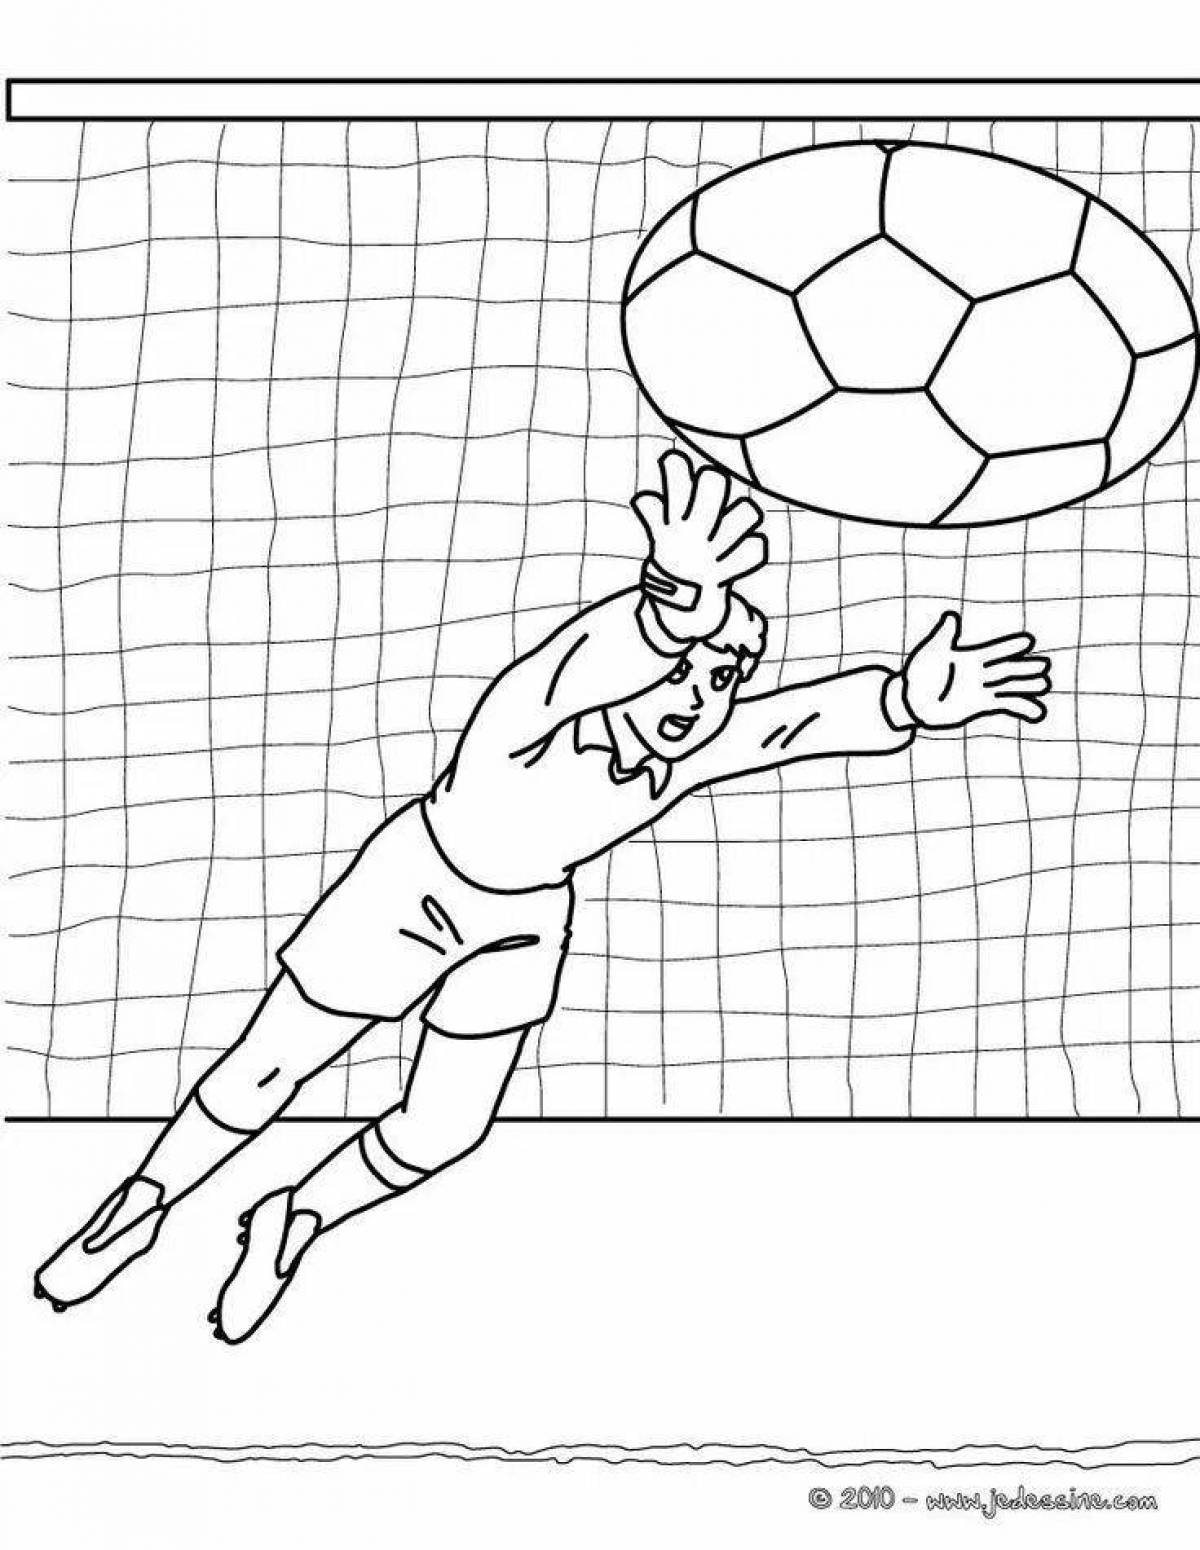 Animated football goalkeeper coloring page